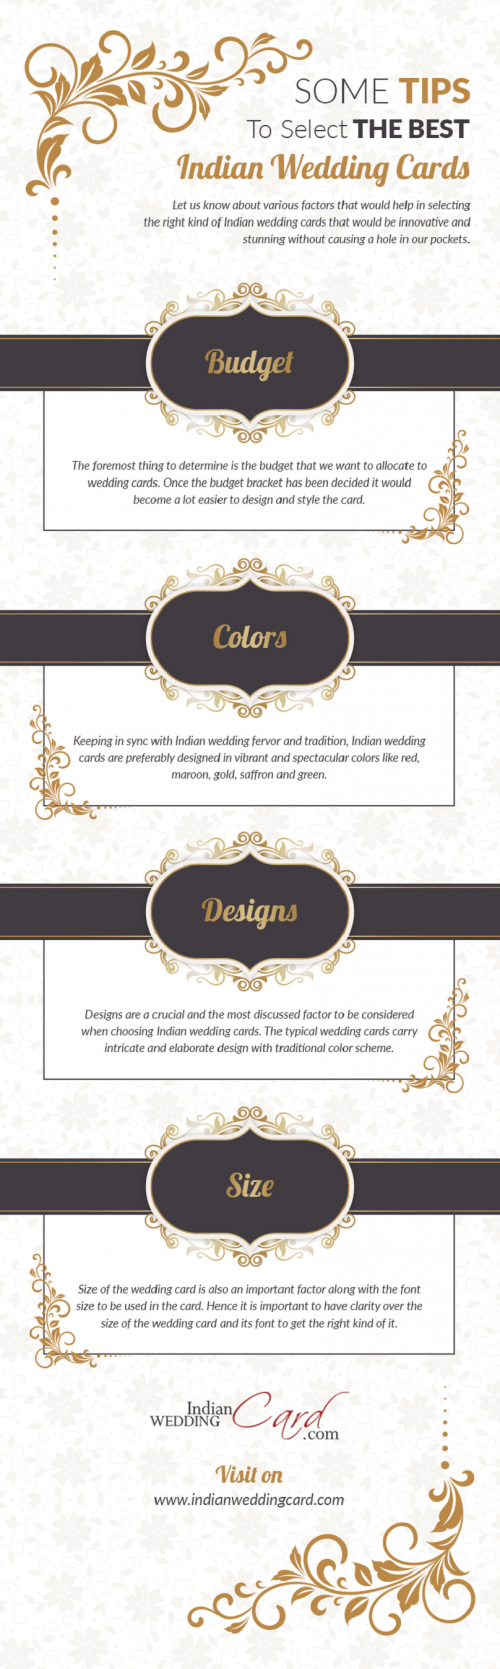 Some-Tips-To-Select-the-Best-Indian-Wedding-Cards.png